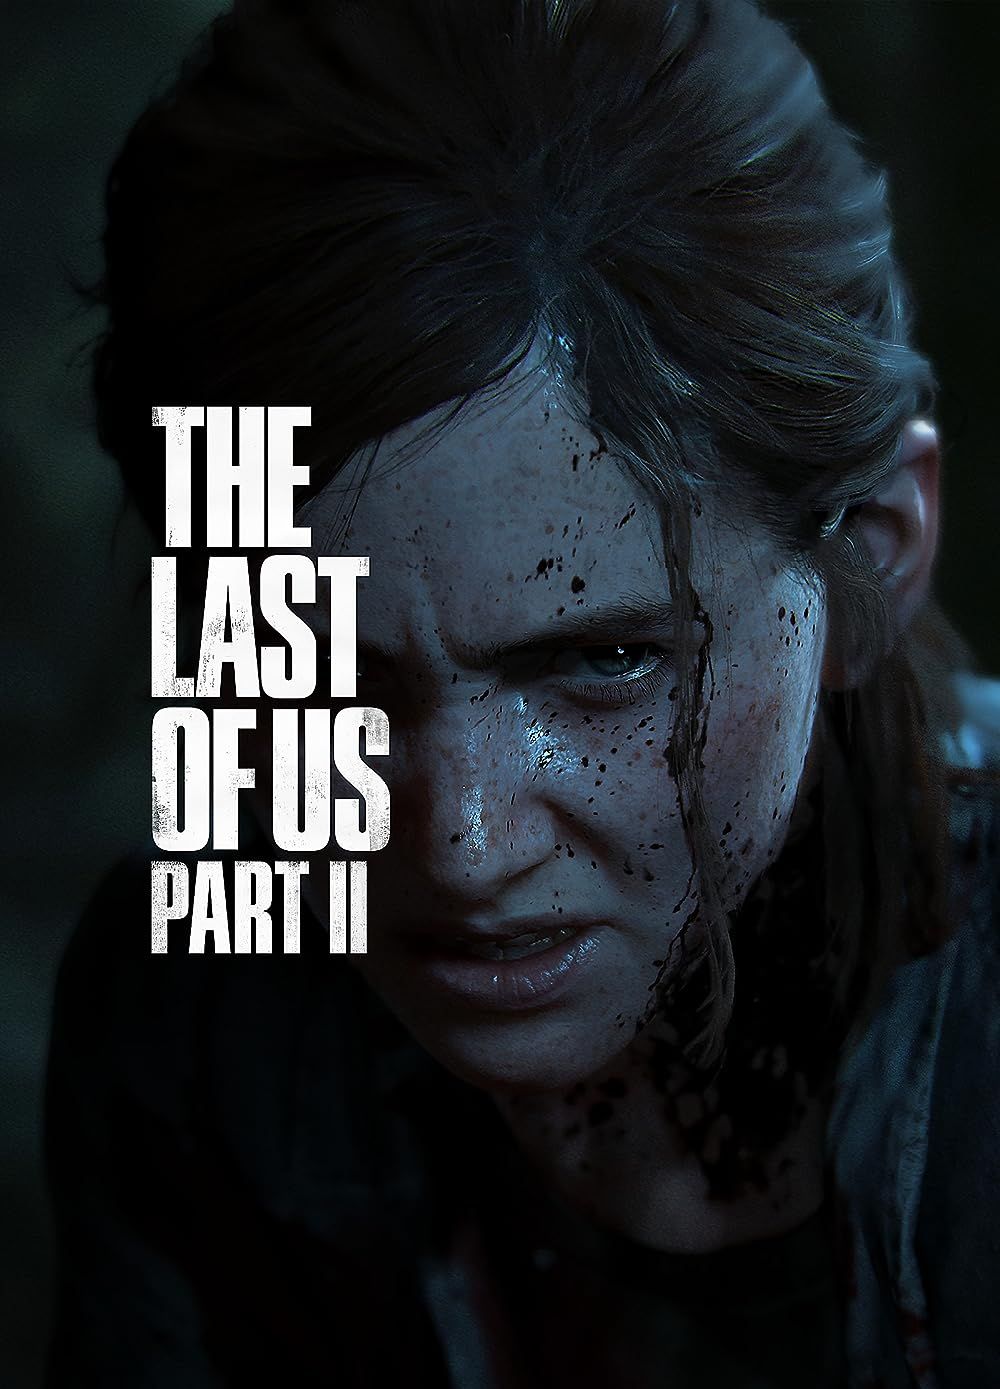 The Last of Us Part 2 video game poster